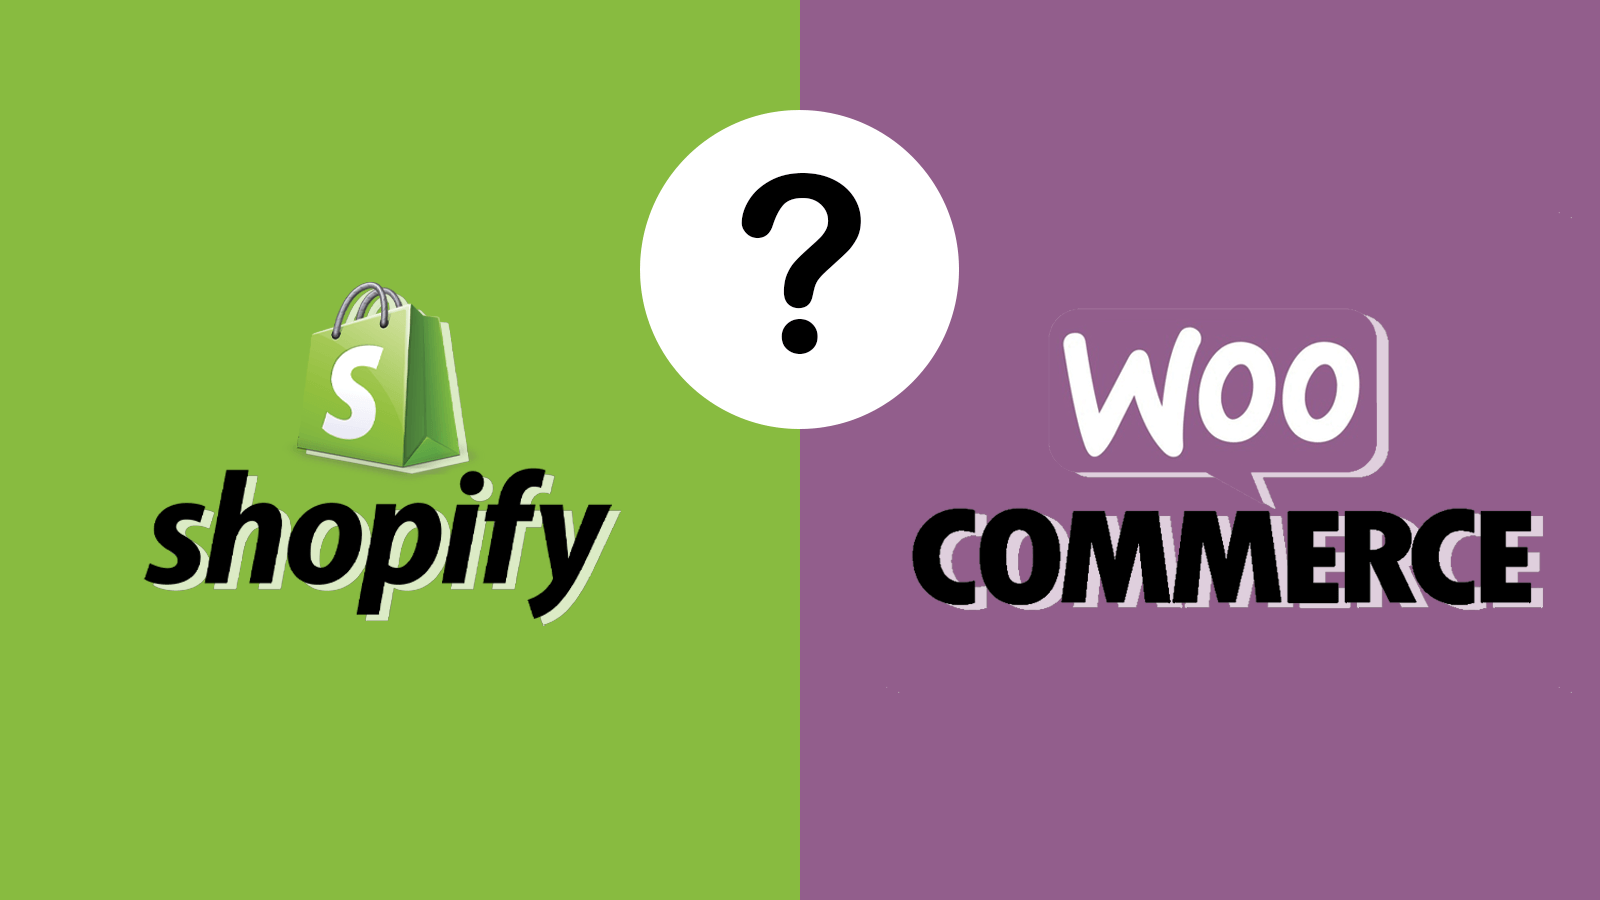 shopify-vs-woocommerce-which-platform-is-better-to-make-an-e-commerce-website.png